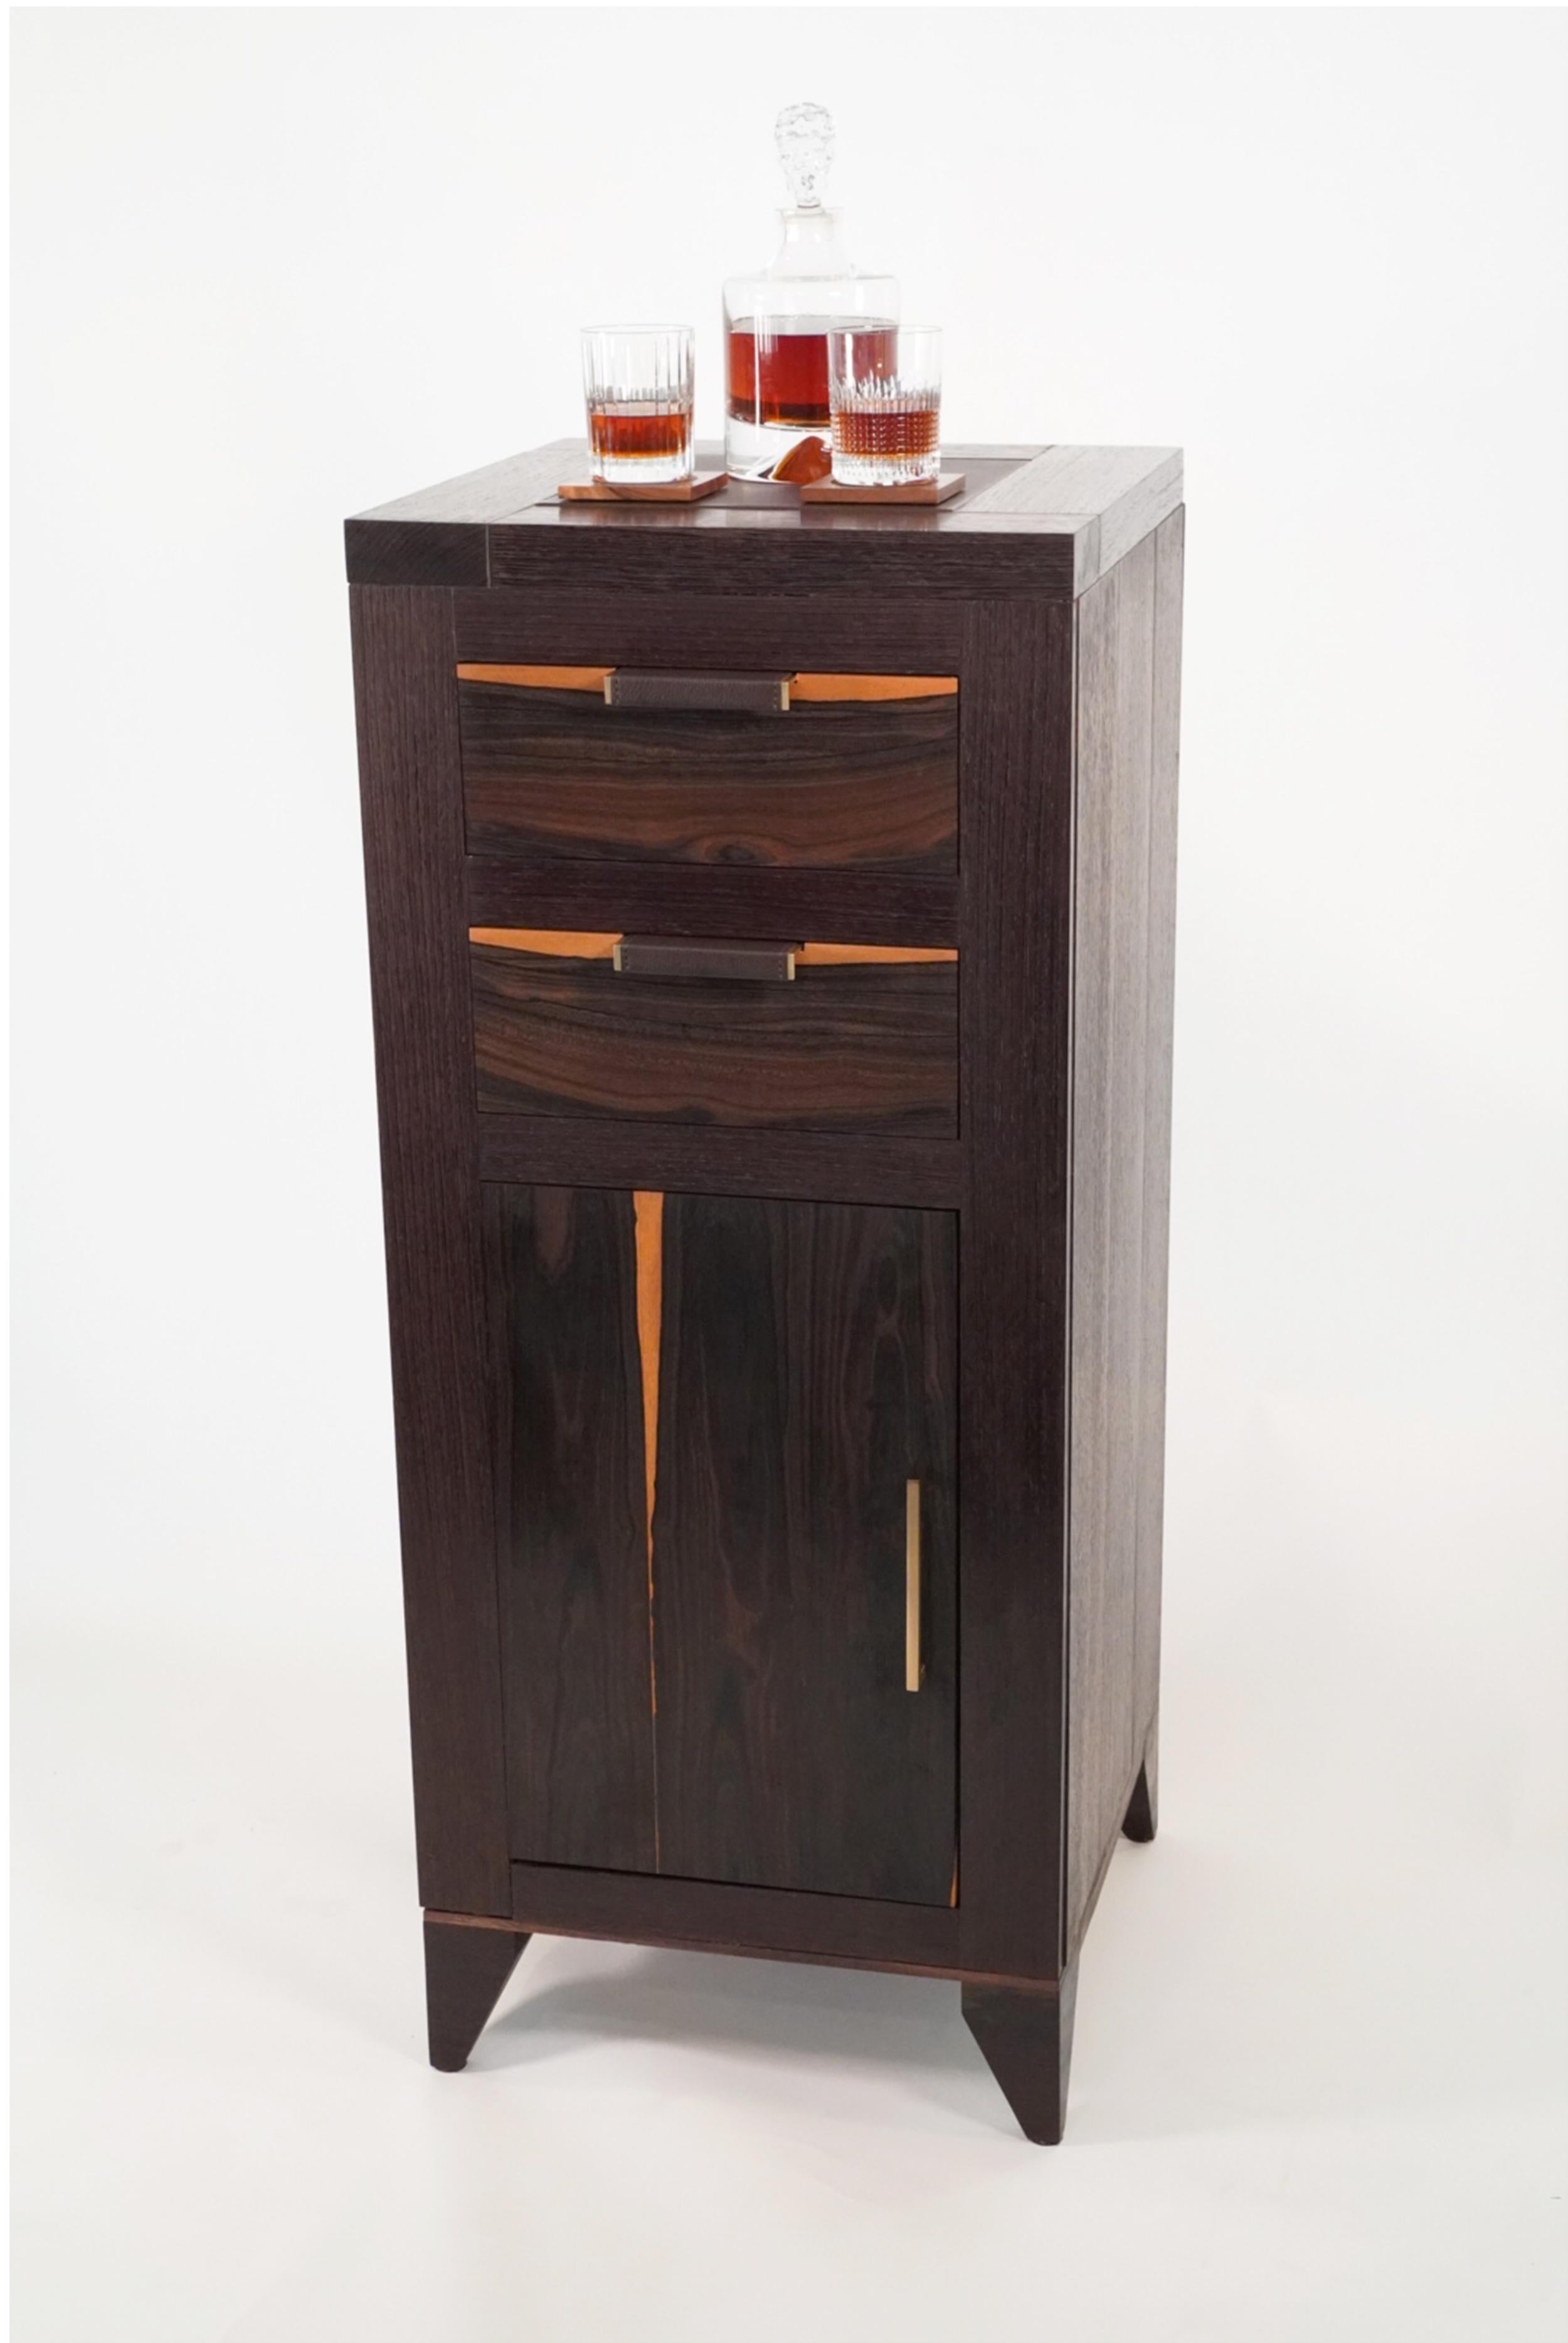 The 21st Century Modern Wenge, Ziricote and Zebrawood liquor cabinet is part of the Walker Design Studios Vanderbilt Collection. The collection is inspired by minimalism and modernism. Exotic hardwoods from across the globe are utilized in this